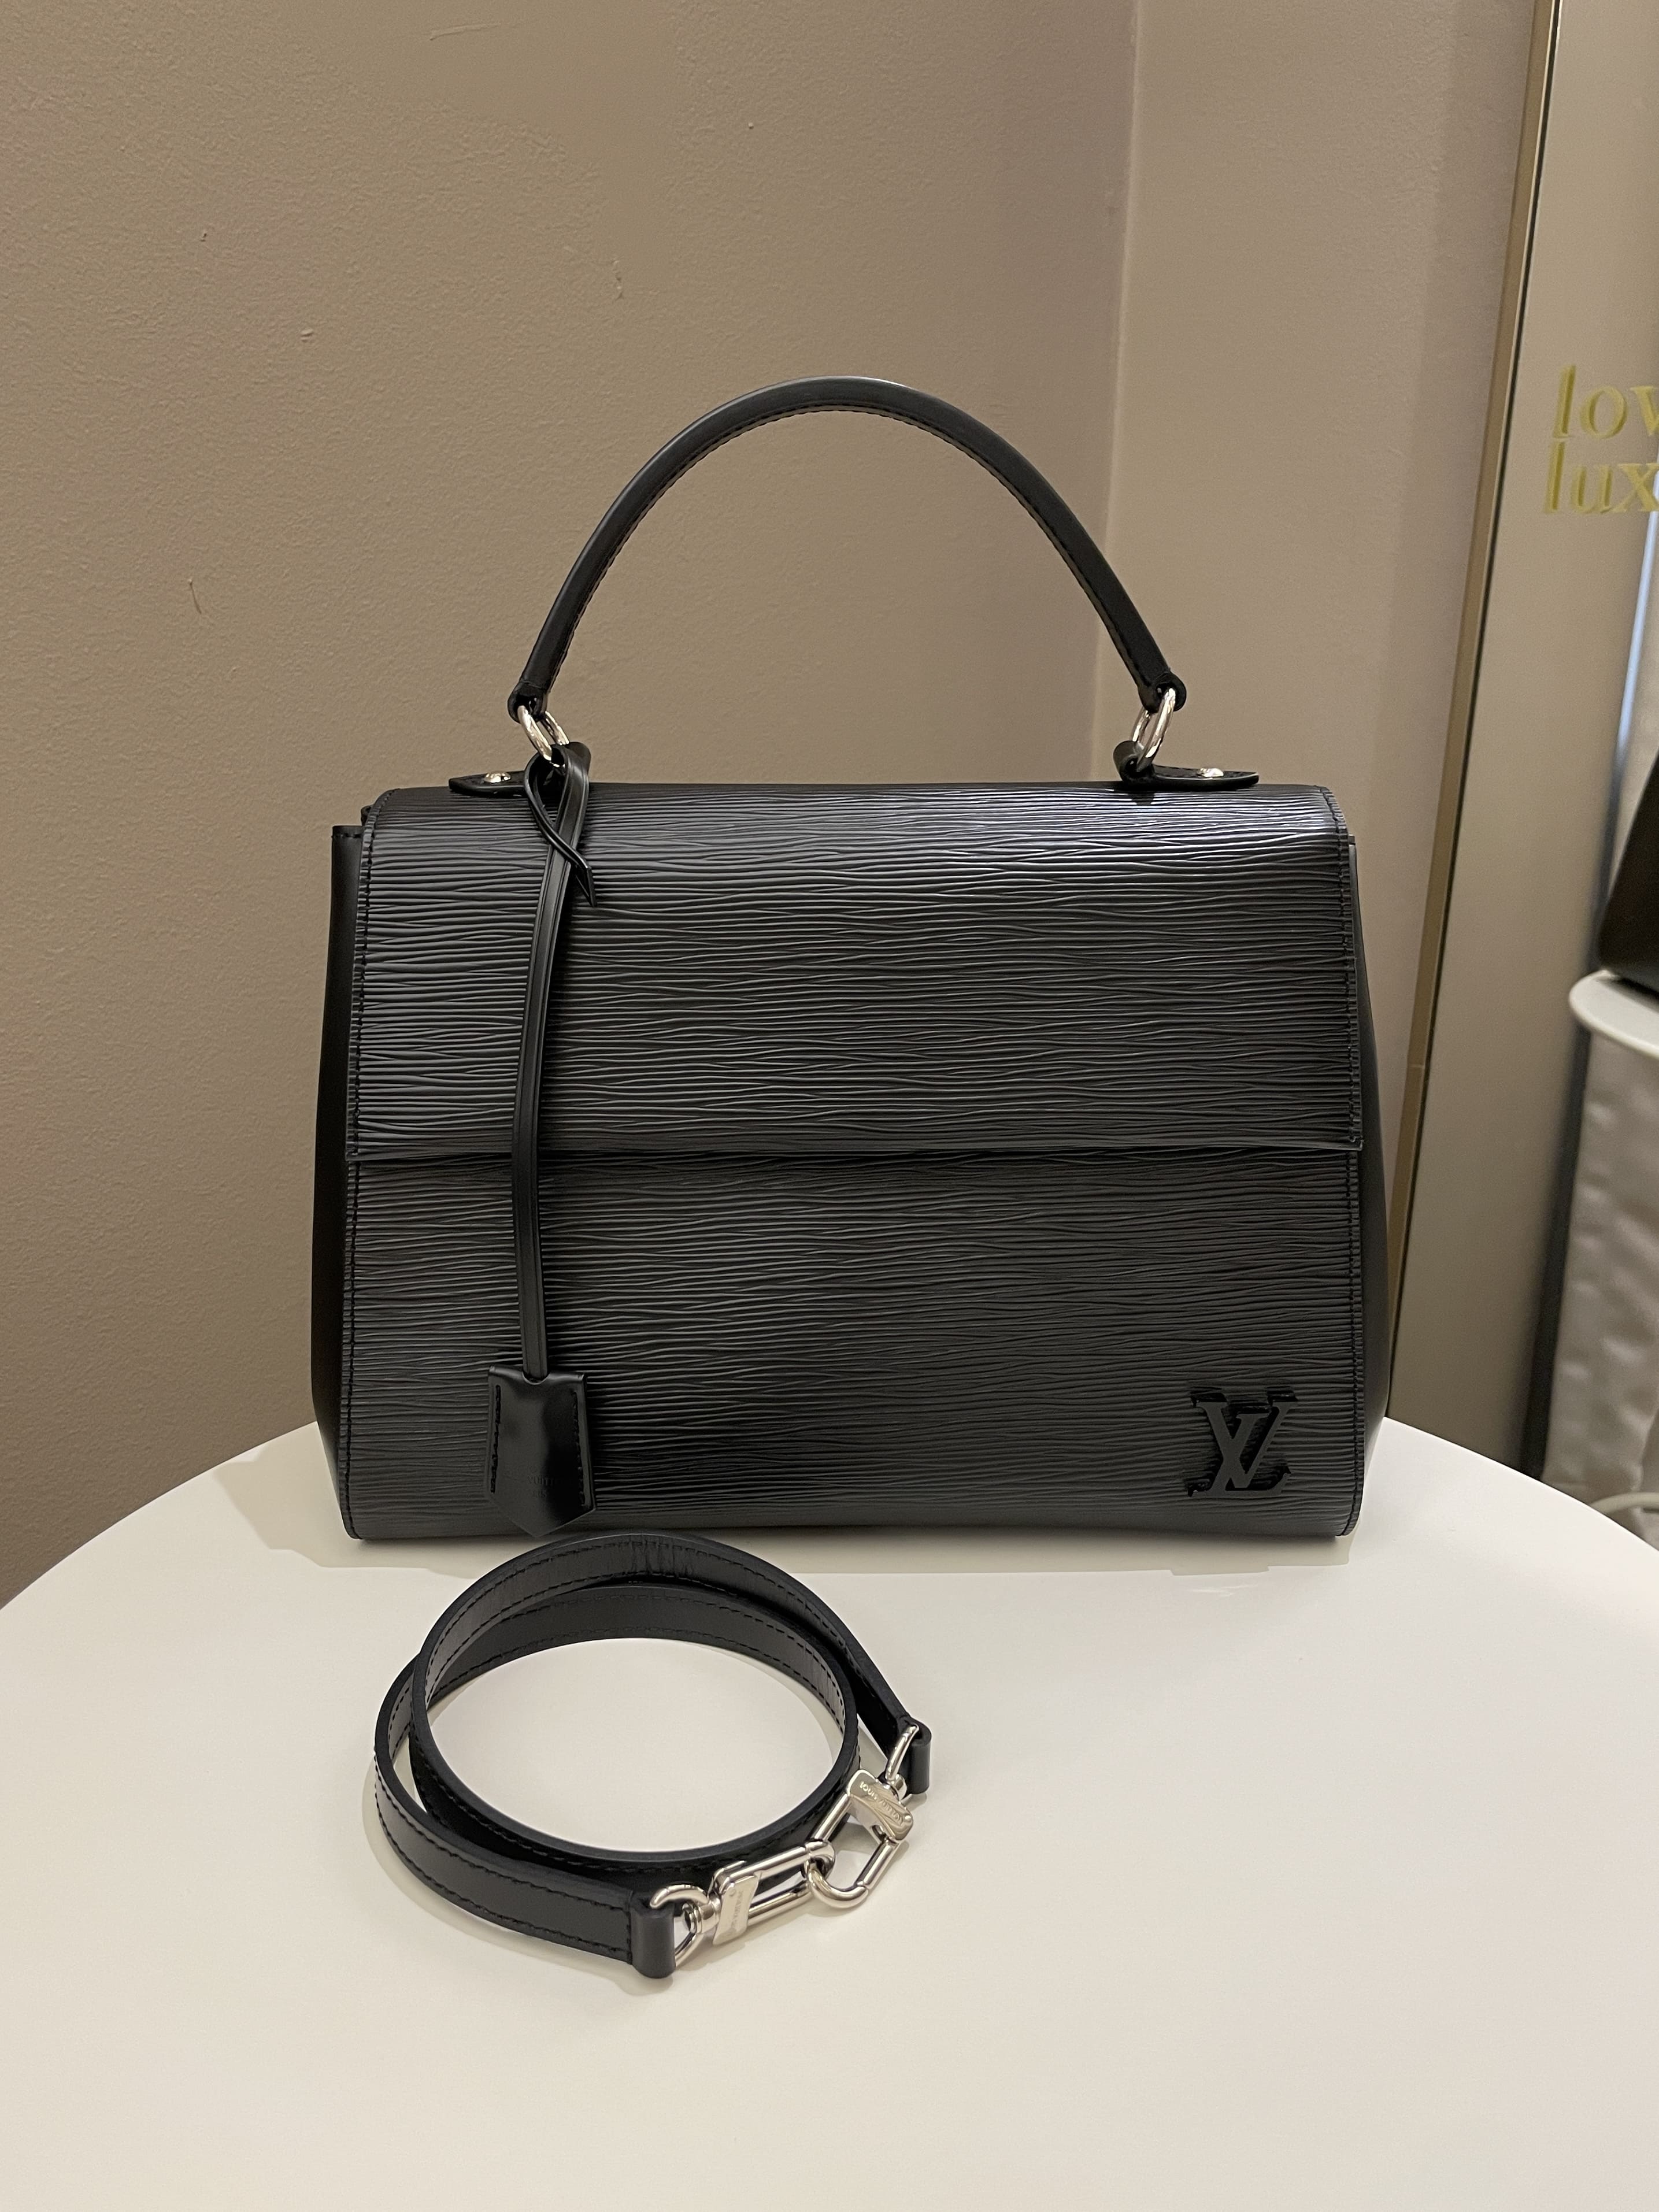 LOUIS VUITTON 'Cluny' MM Bag in Black Epi Leather